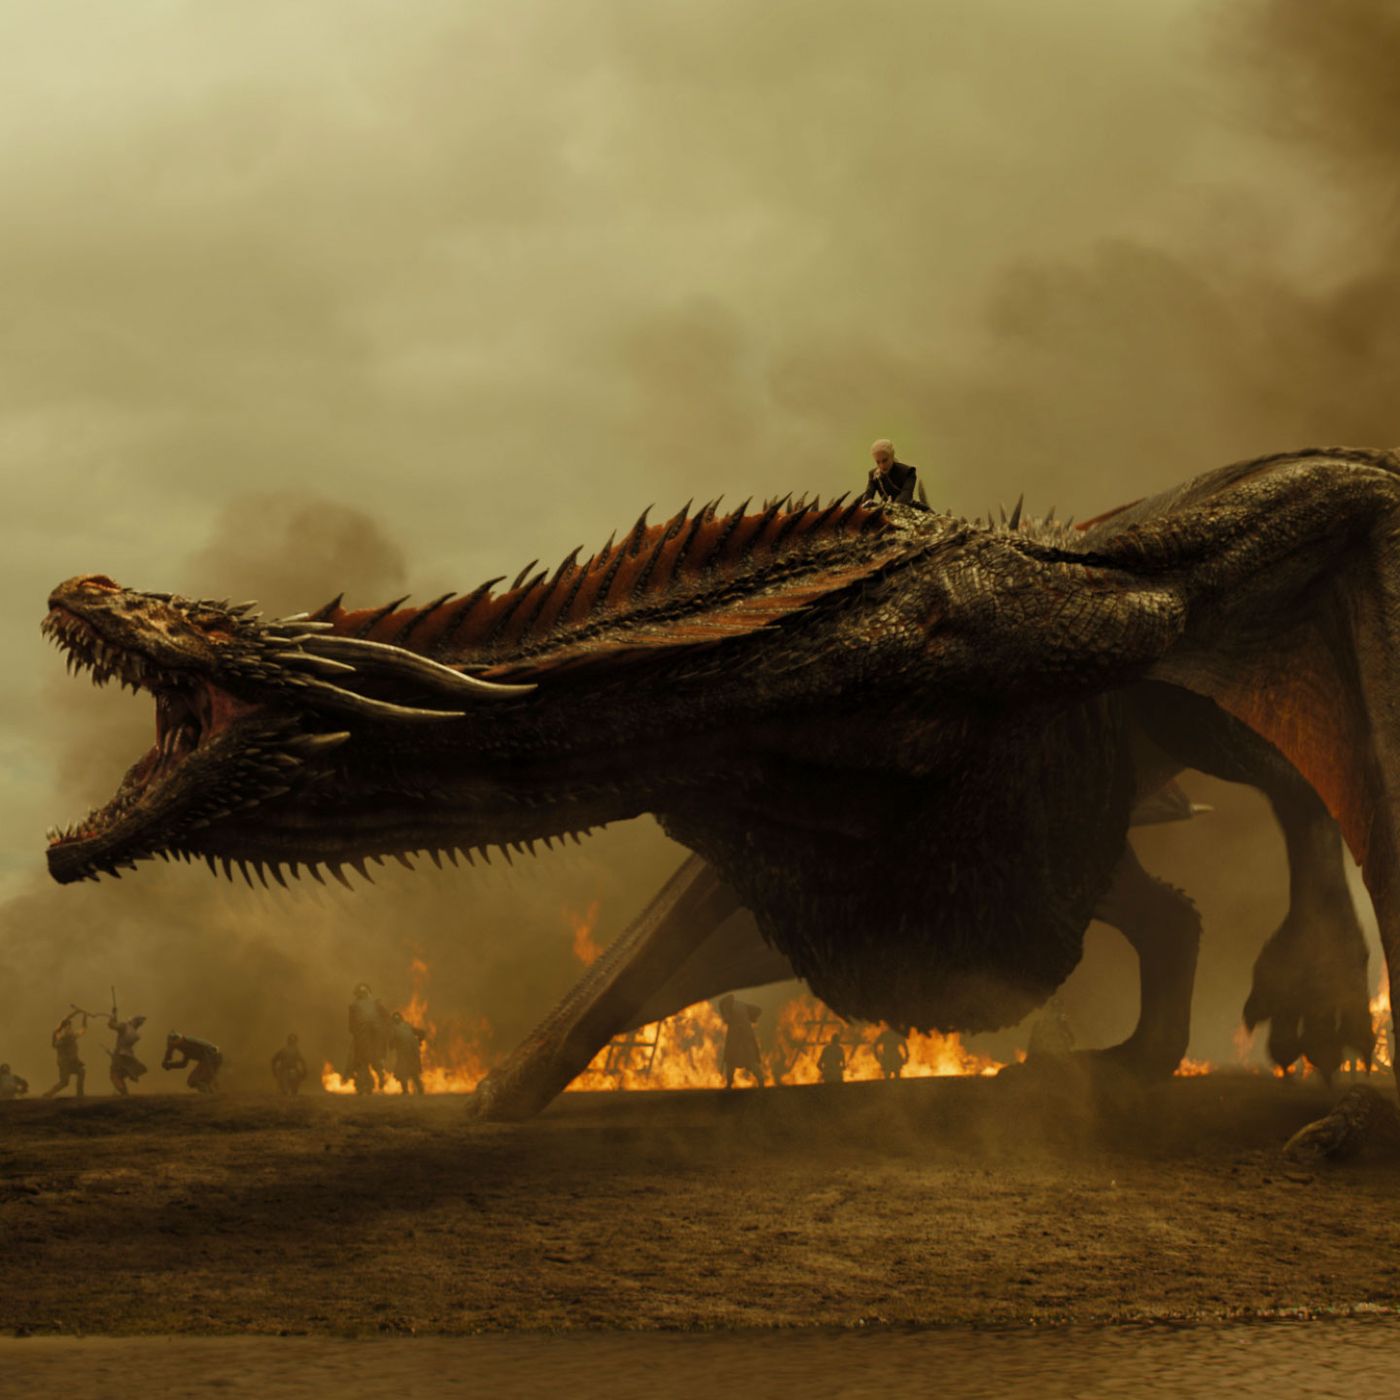 Game of Thrones' Prequel Series: Everything We Know